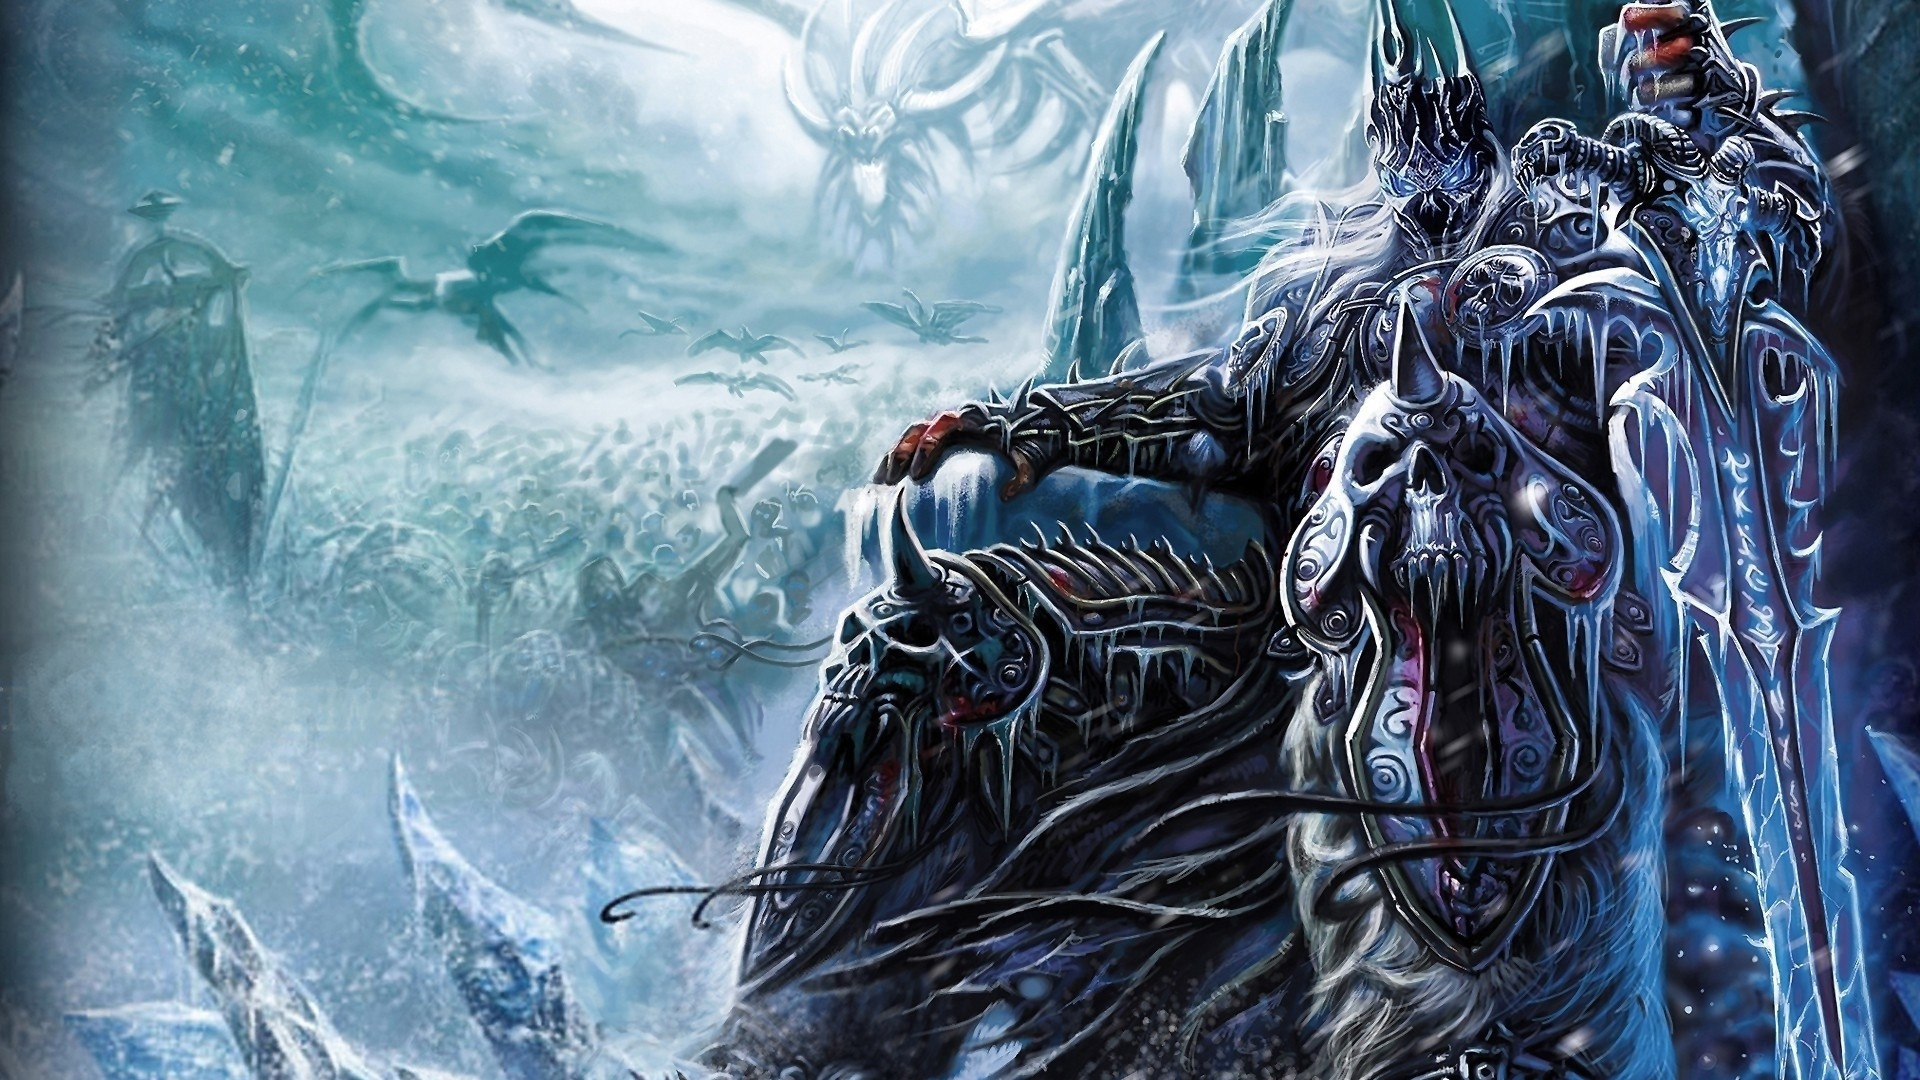 lich king animated wallpaper,action adventure game,cg artwork,water,mythology,fictional character